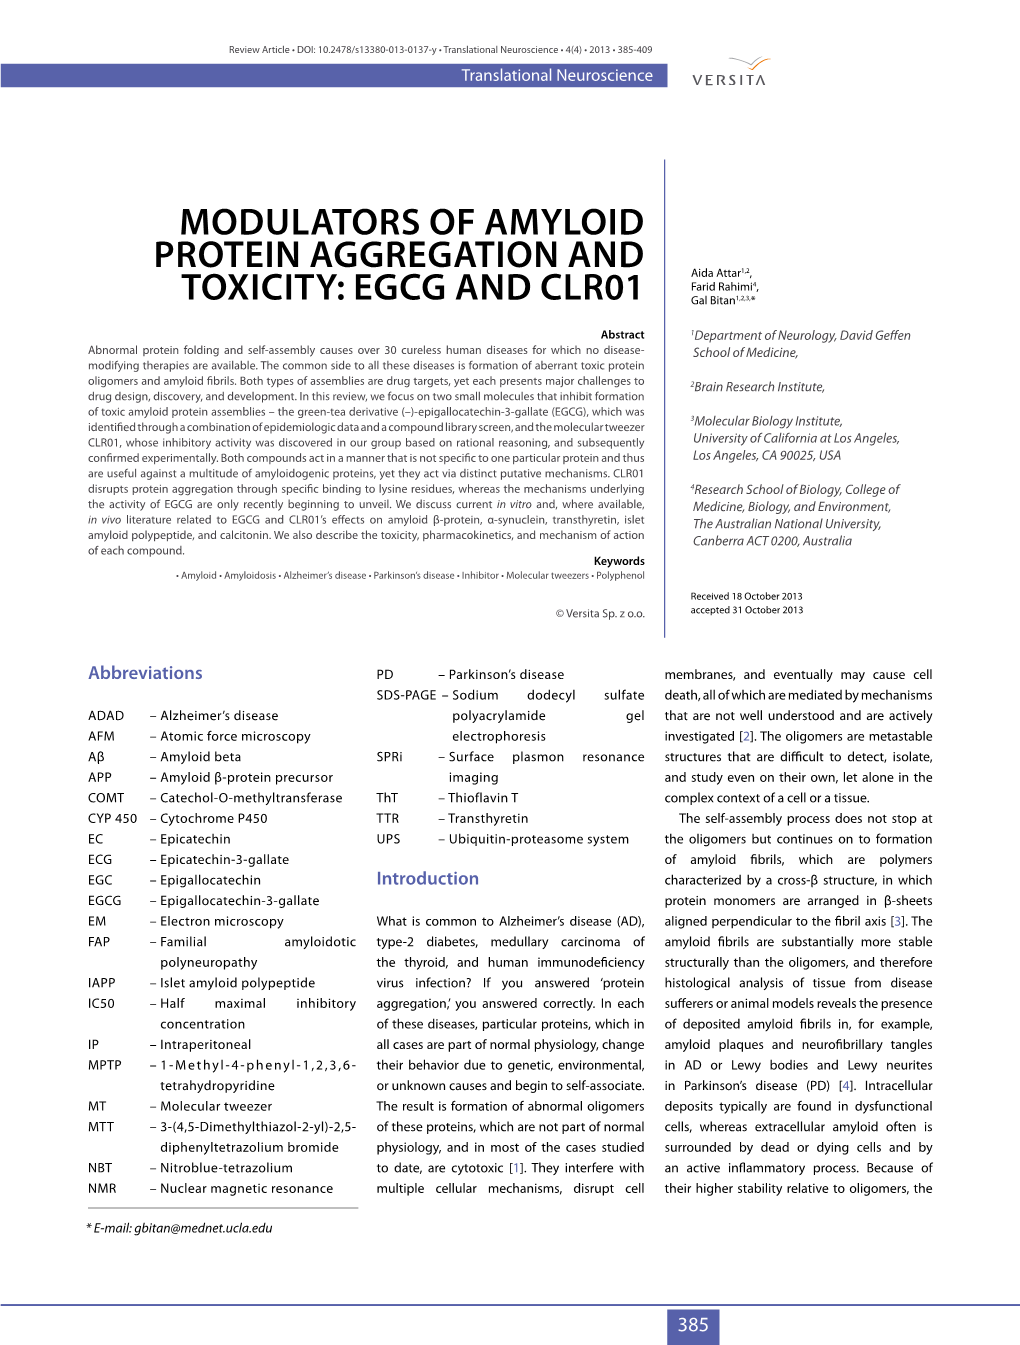 Modulators of Amyloid Protein Aggregation and Toxicity